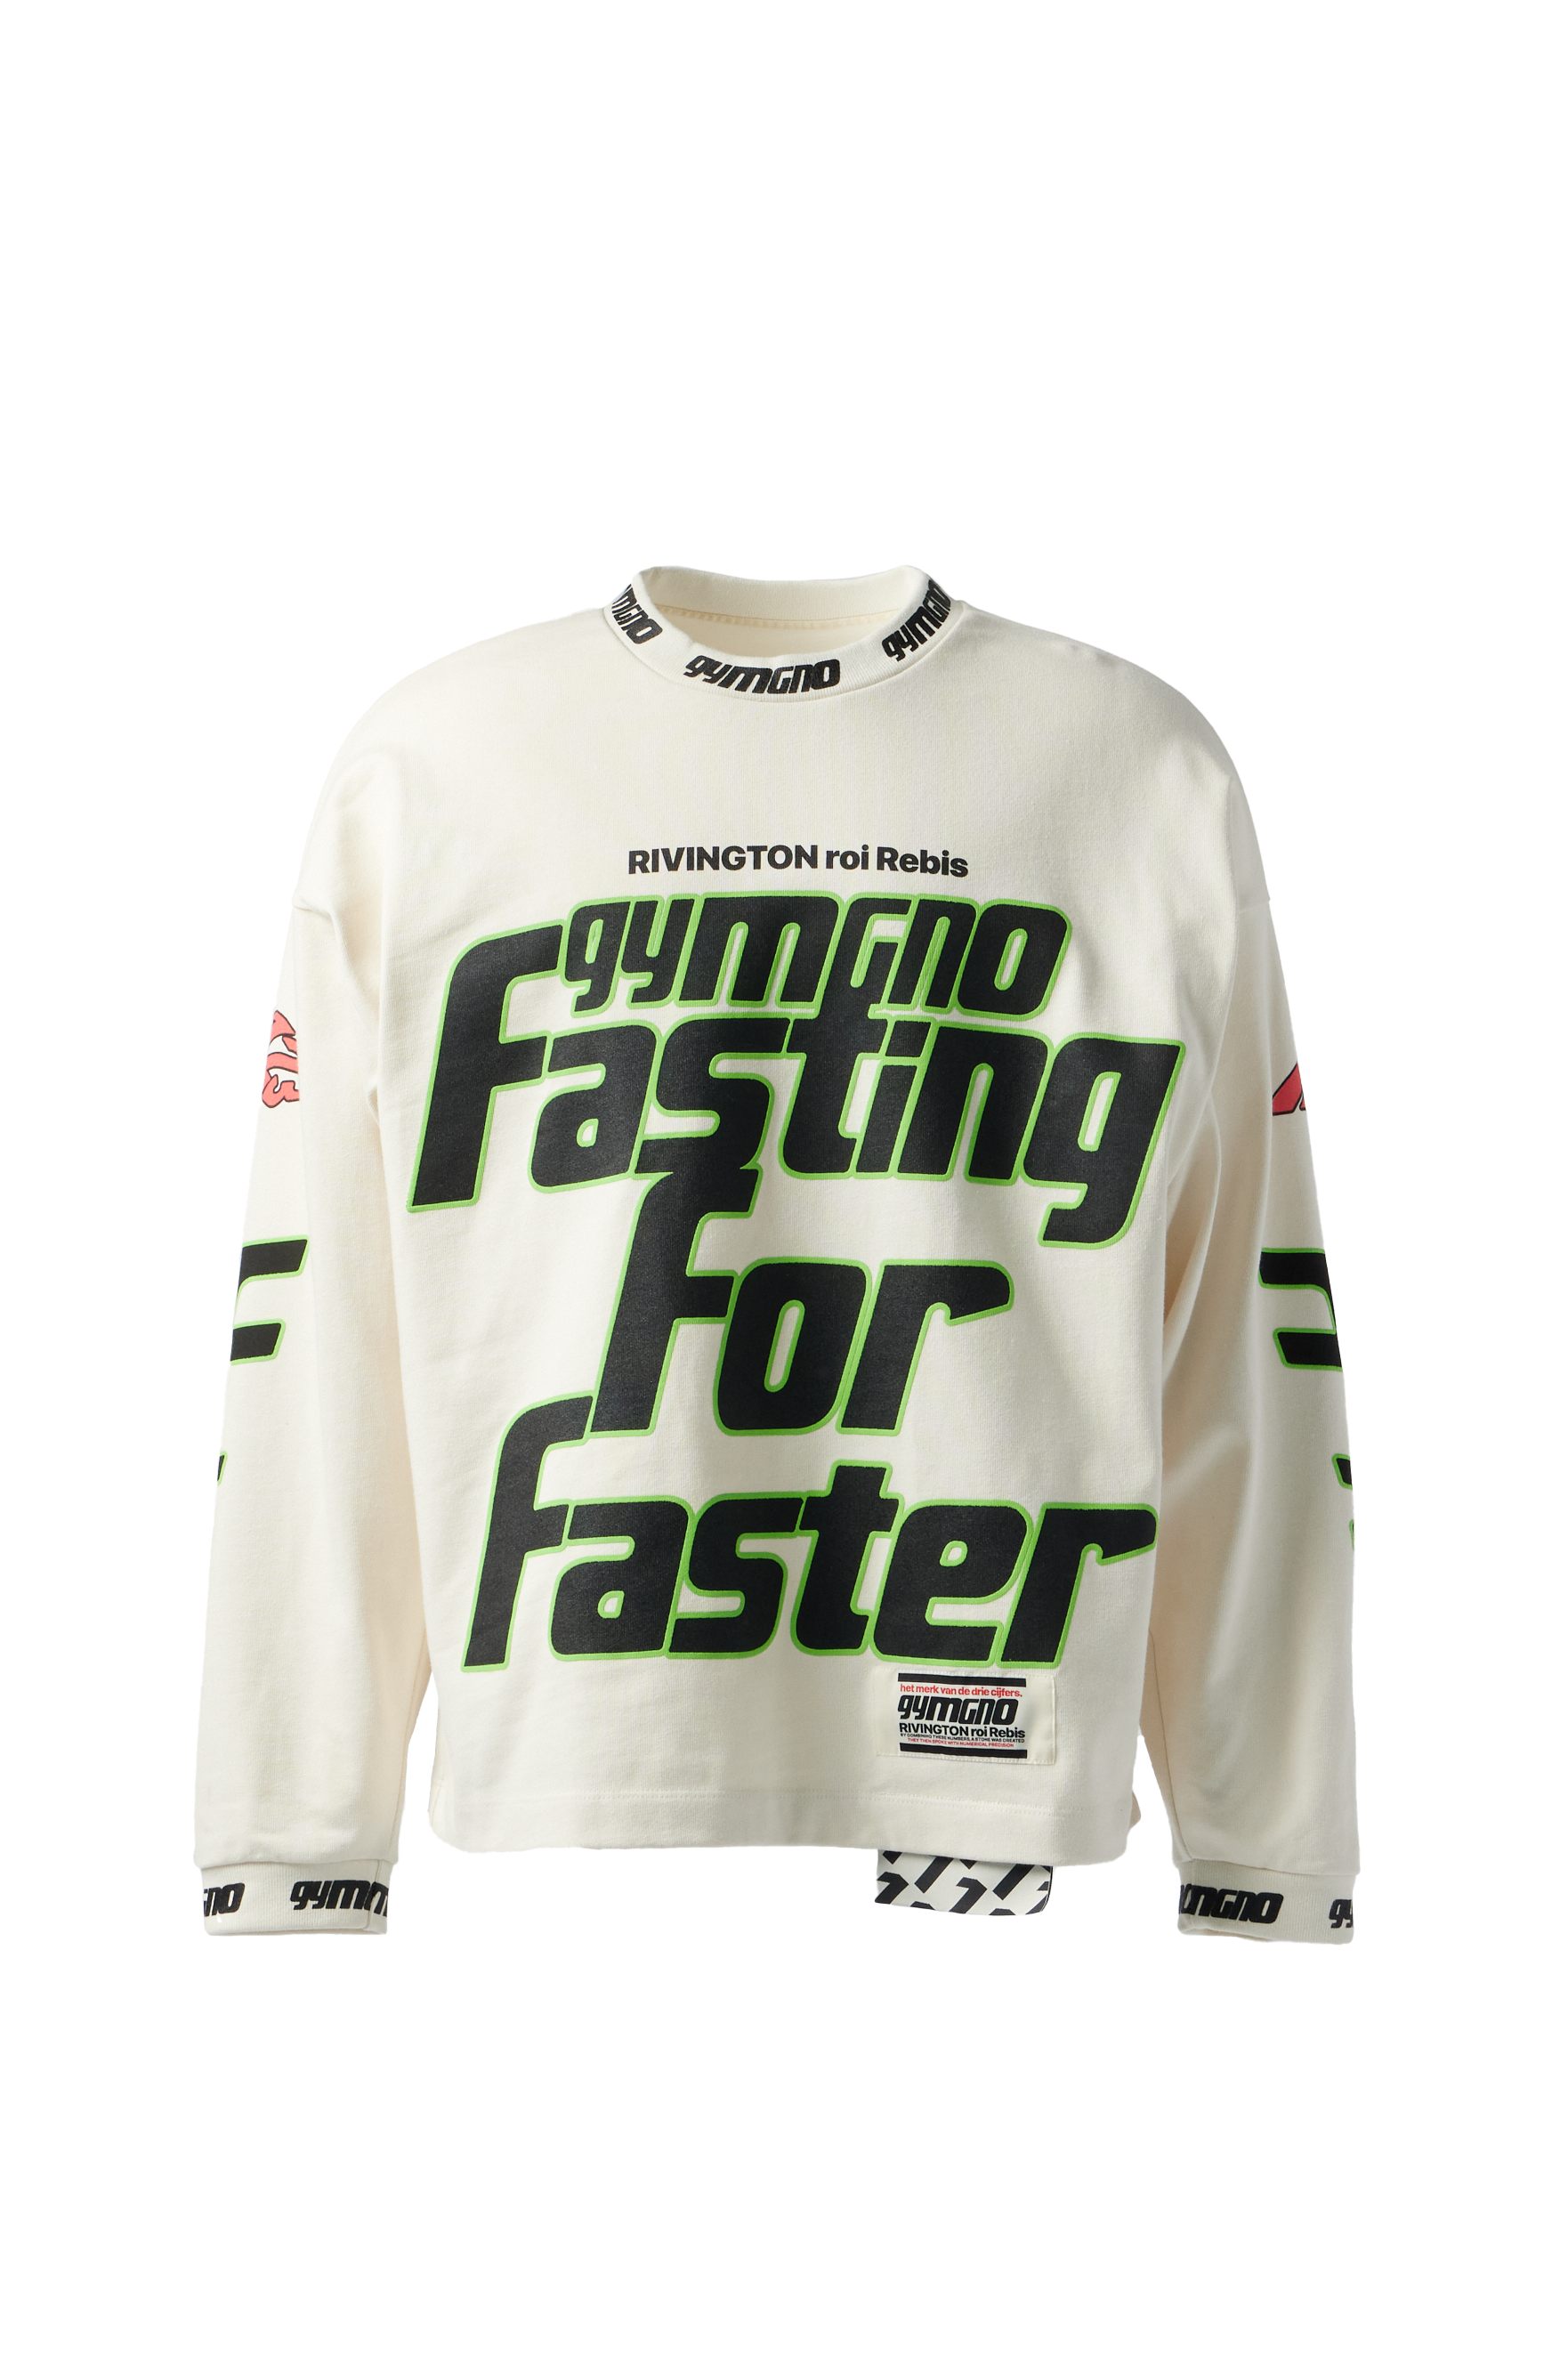 RRR123 - Fasting For Faster L/S Tee product image